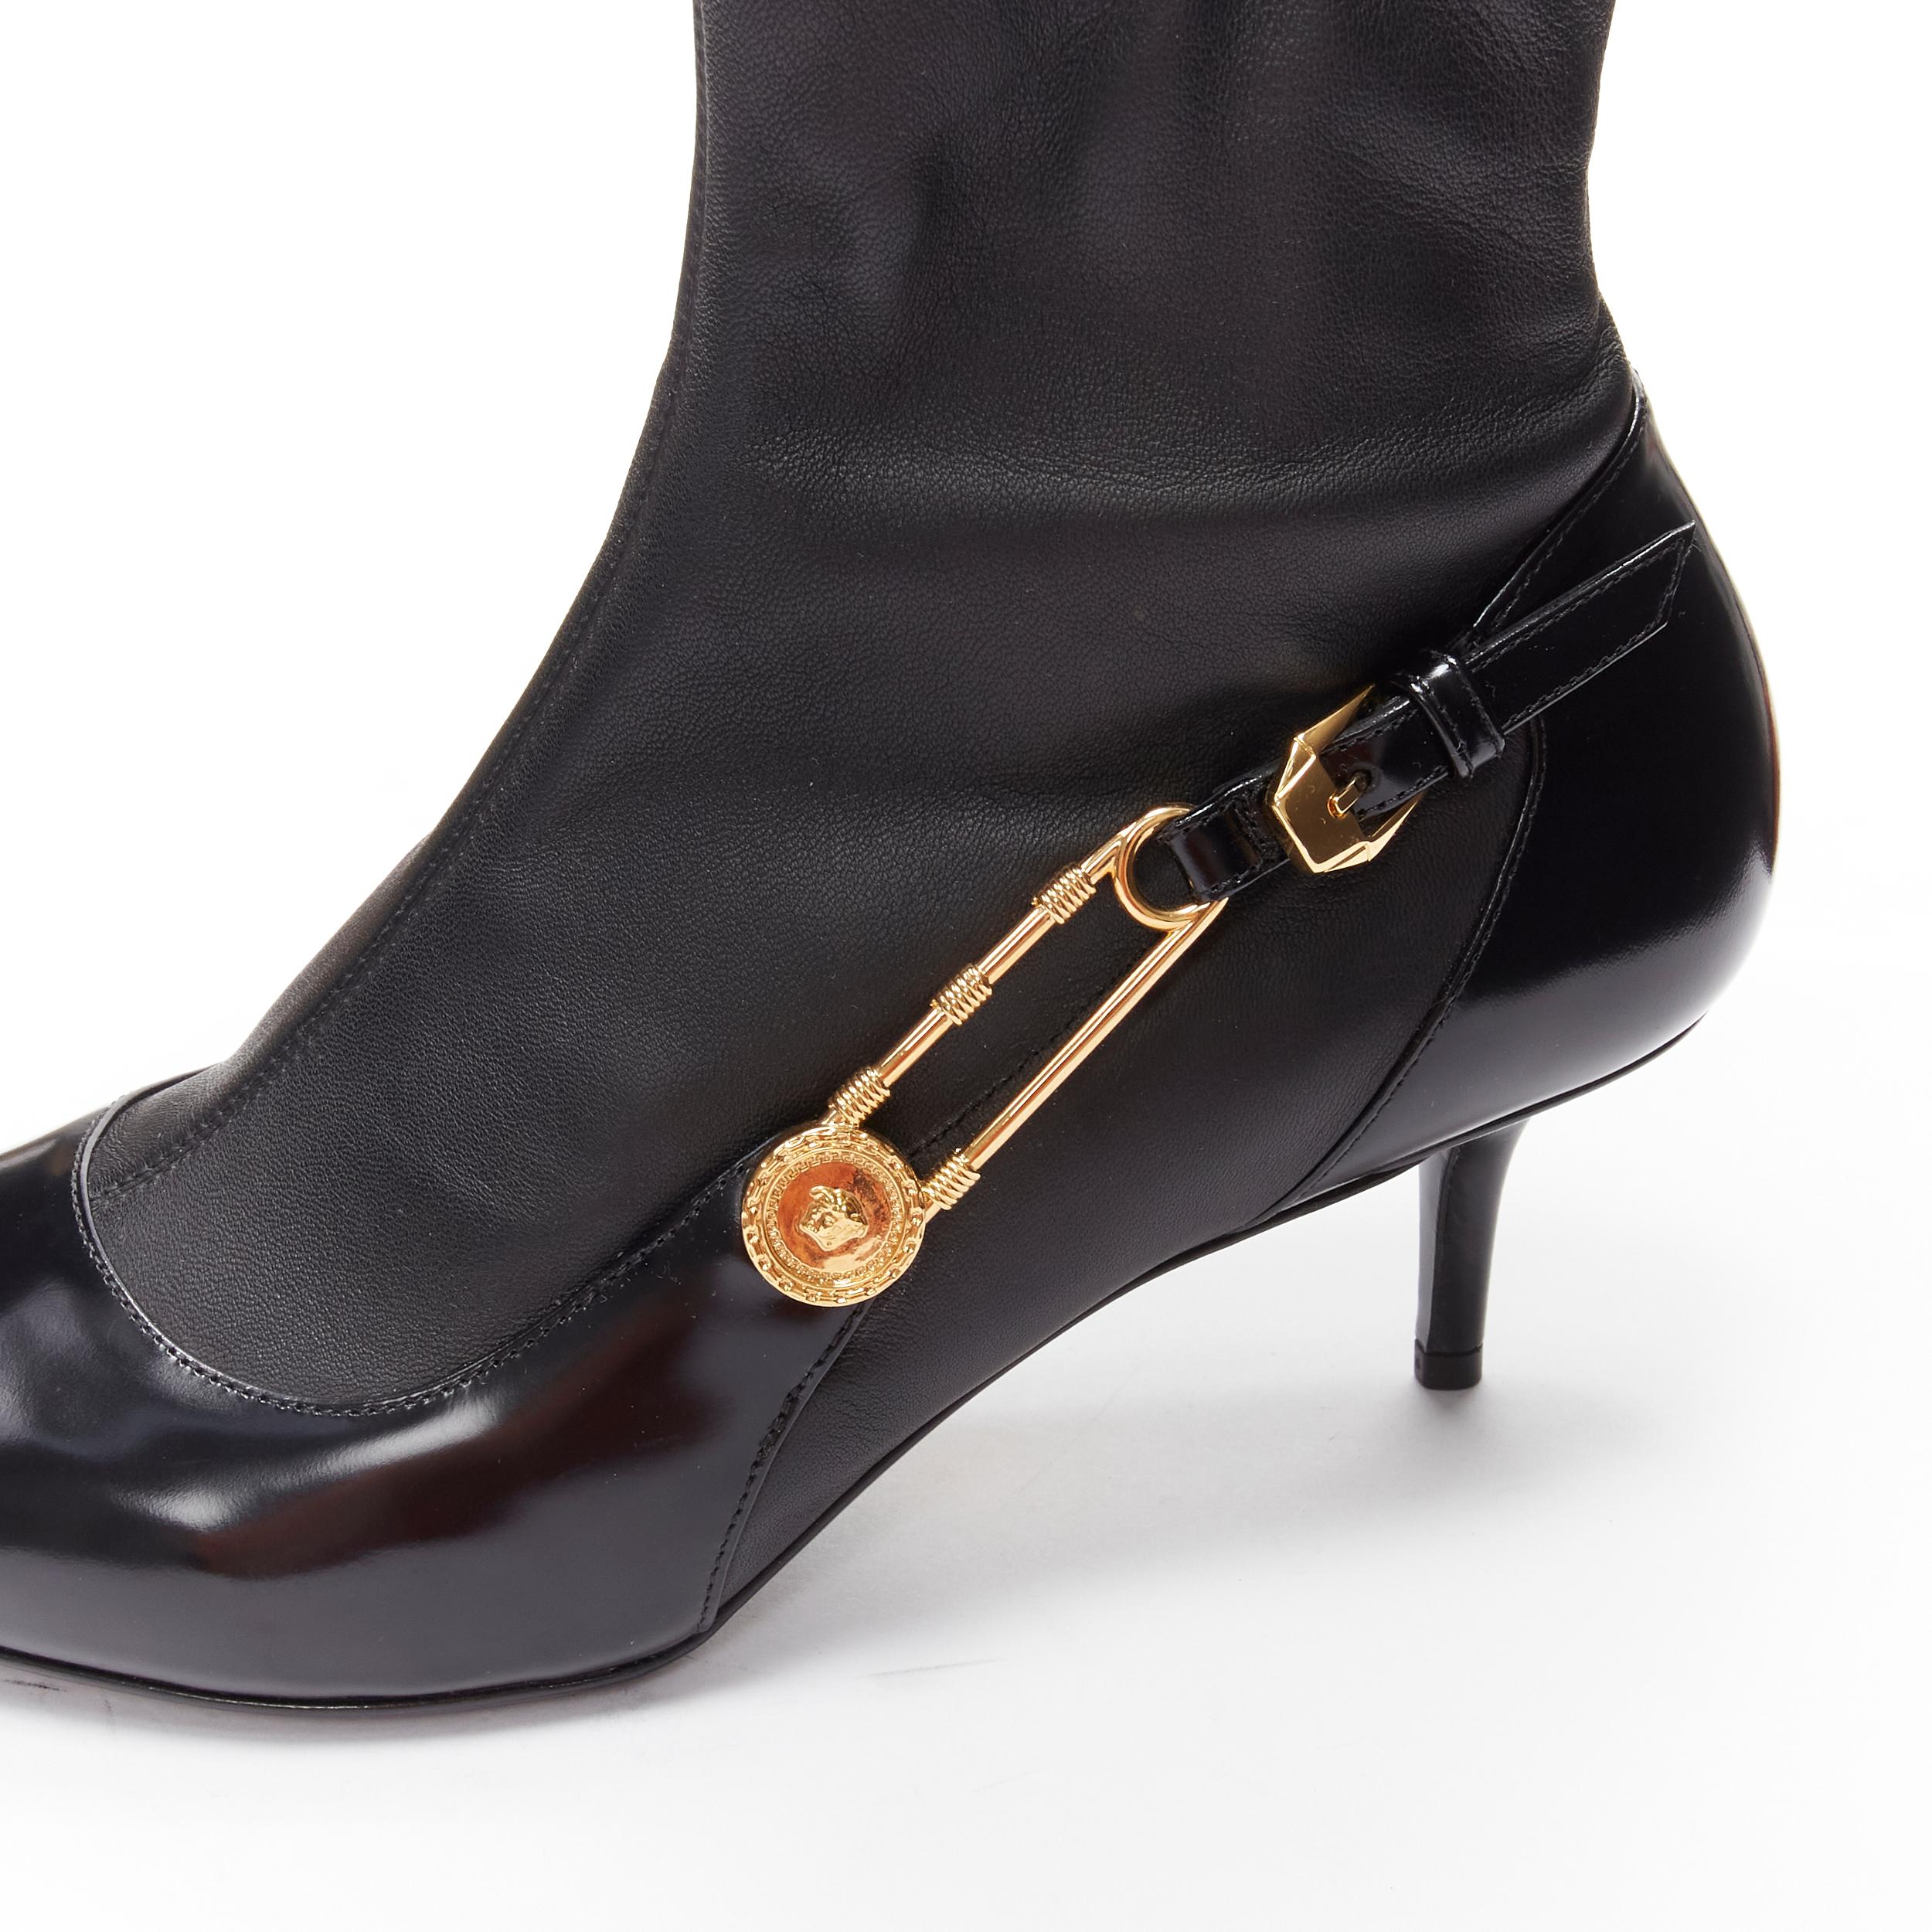 VERSACE gold Medusa Punk Safety Pin black leather kitten heel bootie EU39
Reference: TGAS/C02074
Brand: Versace
Designer: Donatella Versace
Model: DST422H DNA28 D41OH
Material: Leather
Color: Black
Pattern: Solid
Extra Details: Soft leather sock